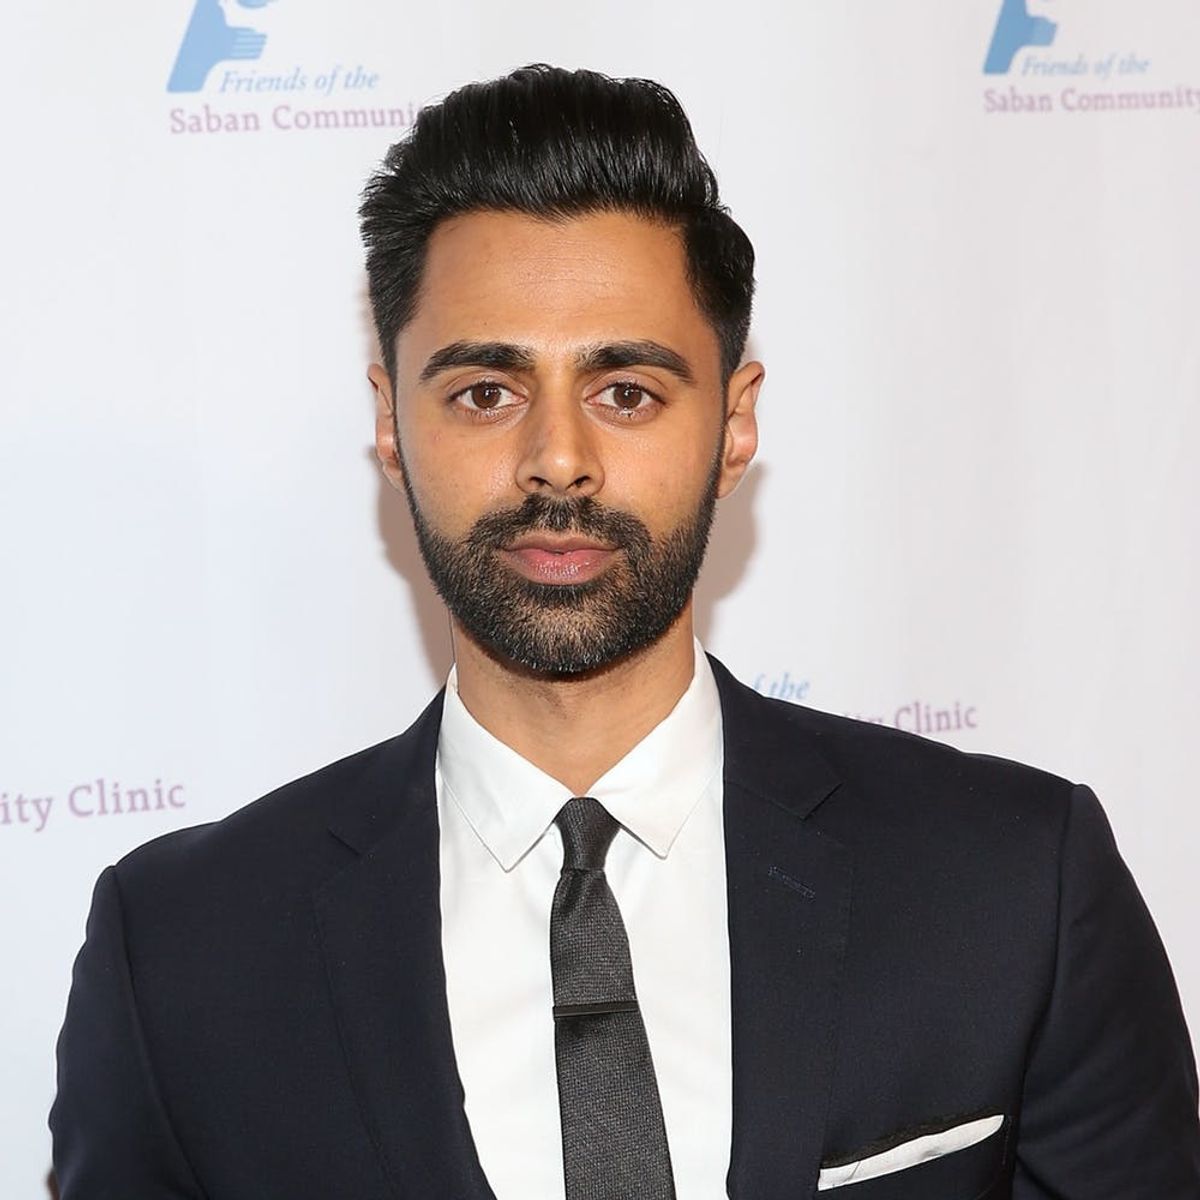 People Are Angry That Netflix Censored ‘Patriot Act With Hasan Minhaj’ at the Request of the Saudi Regime